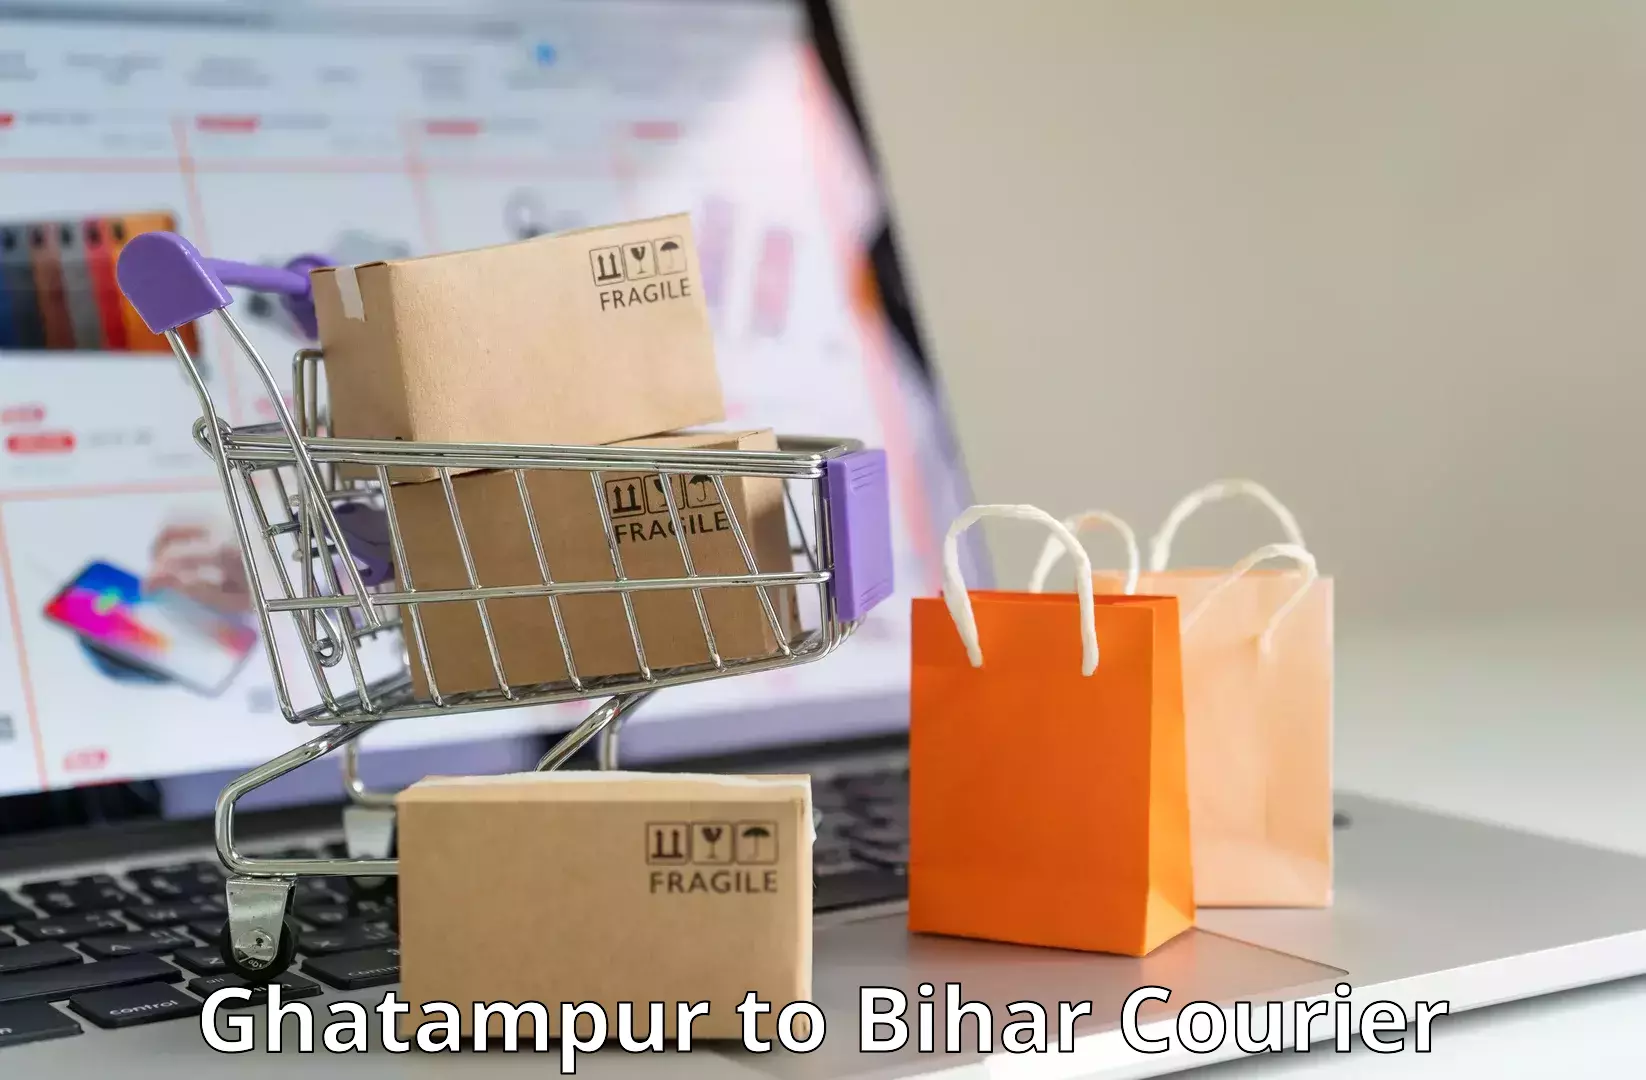 Same-day delivery solutions Ghatampur to Sultanganj